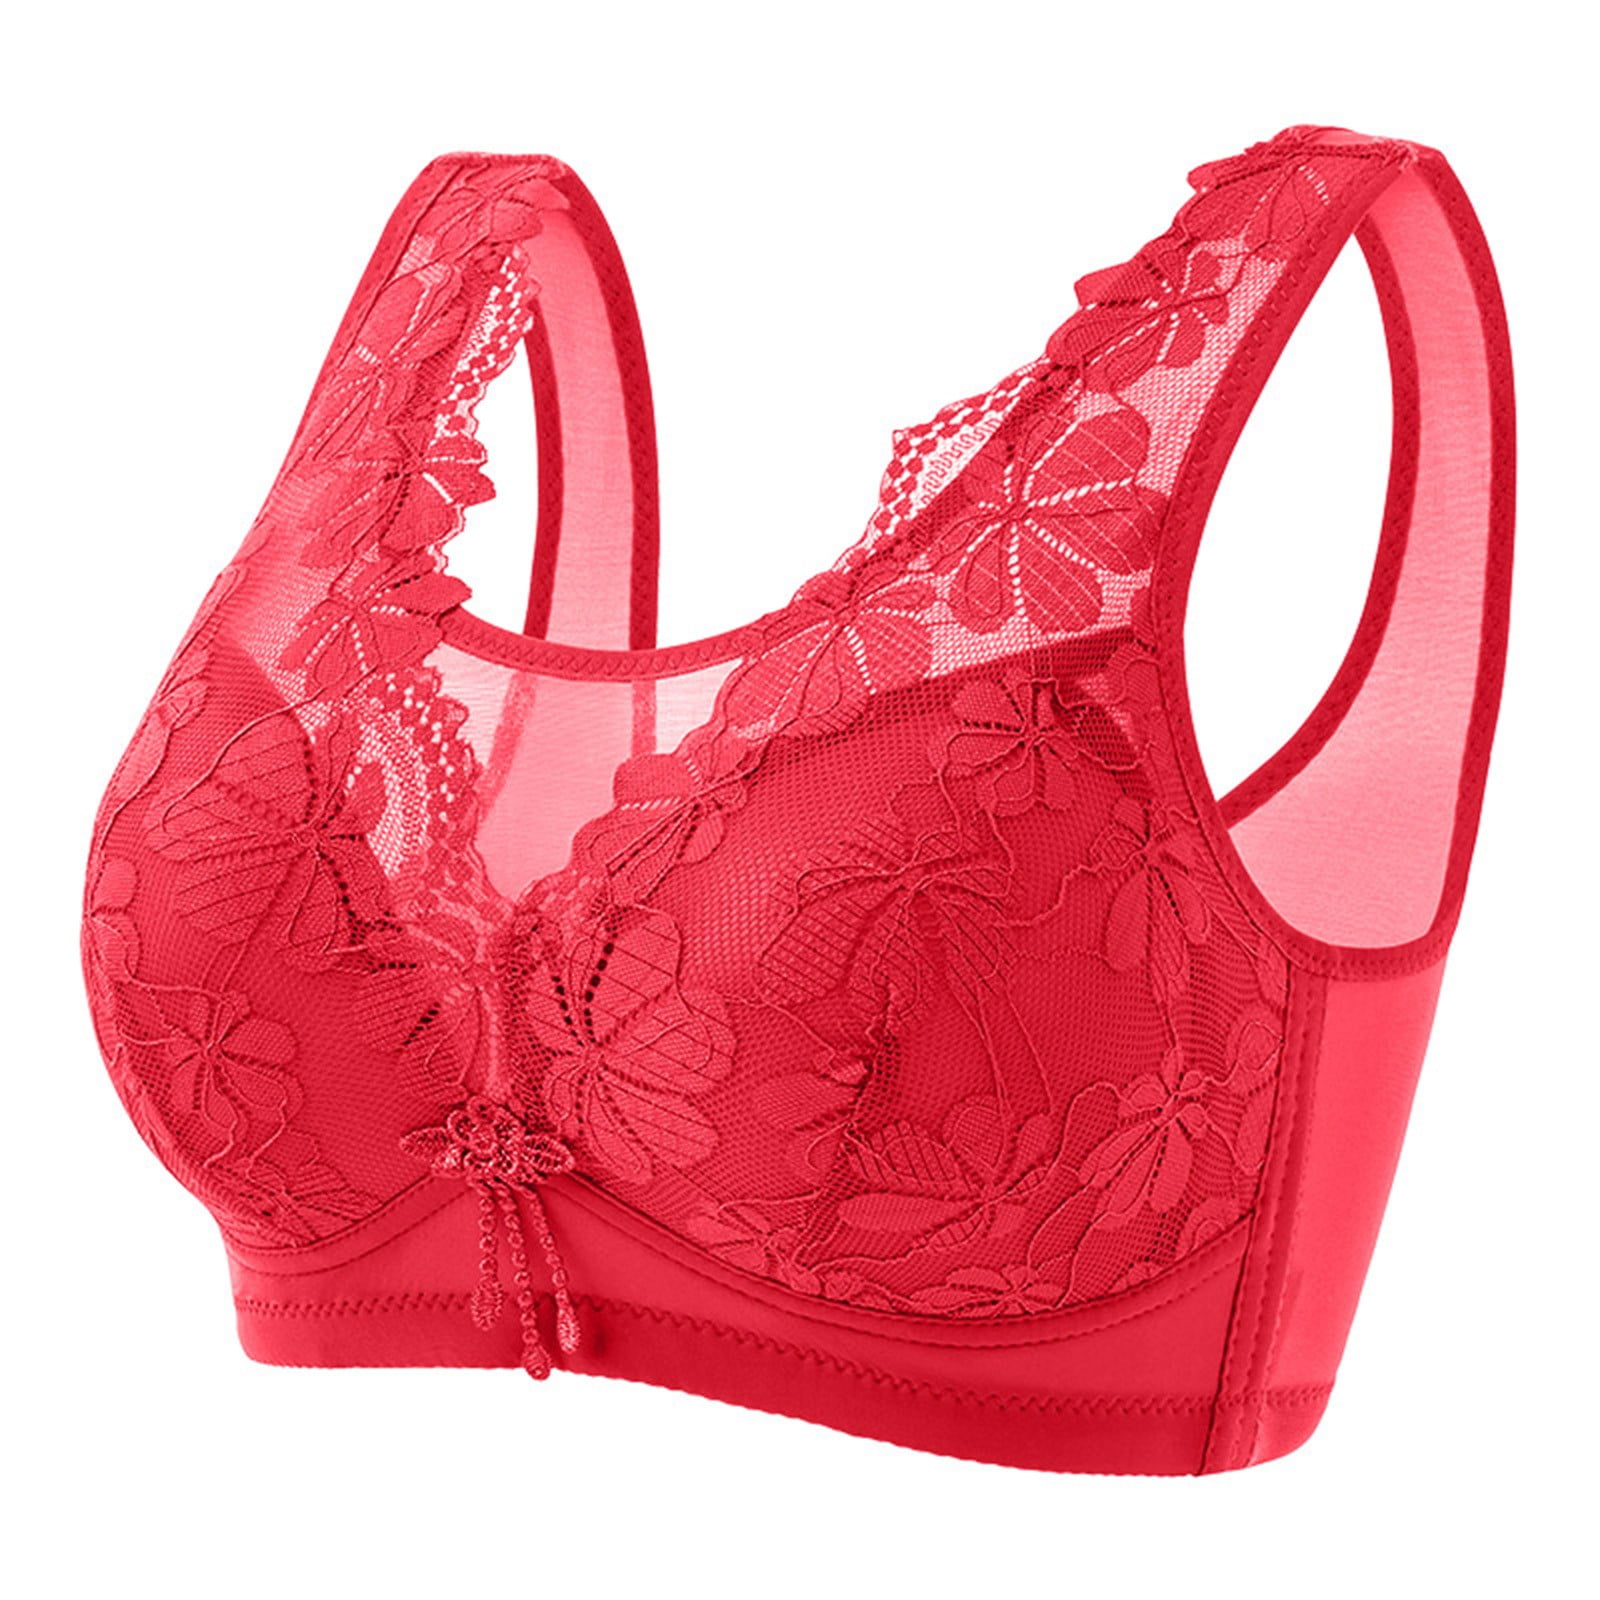 safuny Everyday Bra for Women Lace Ultra Light Lingerie Thin and Adjustable  Droop Back Wrap Up Comfort Daily Brassiere Underwear Wireless Push-Up Bra  Camisole Red XXXL 